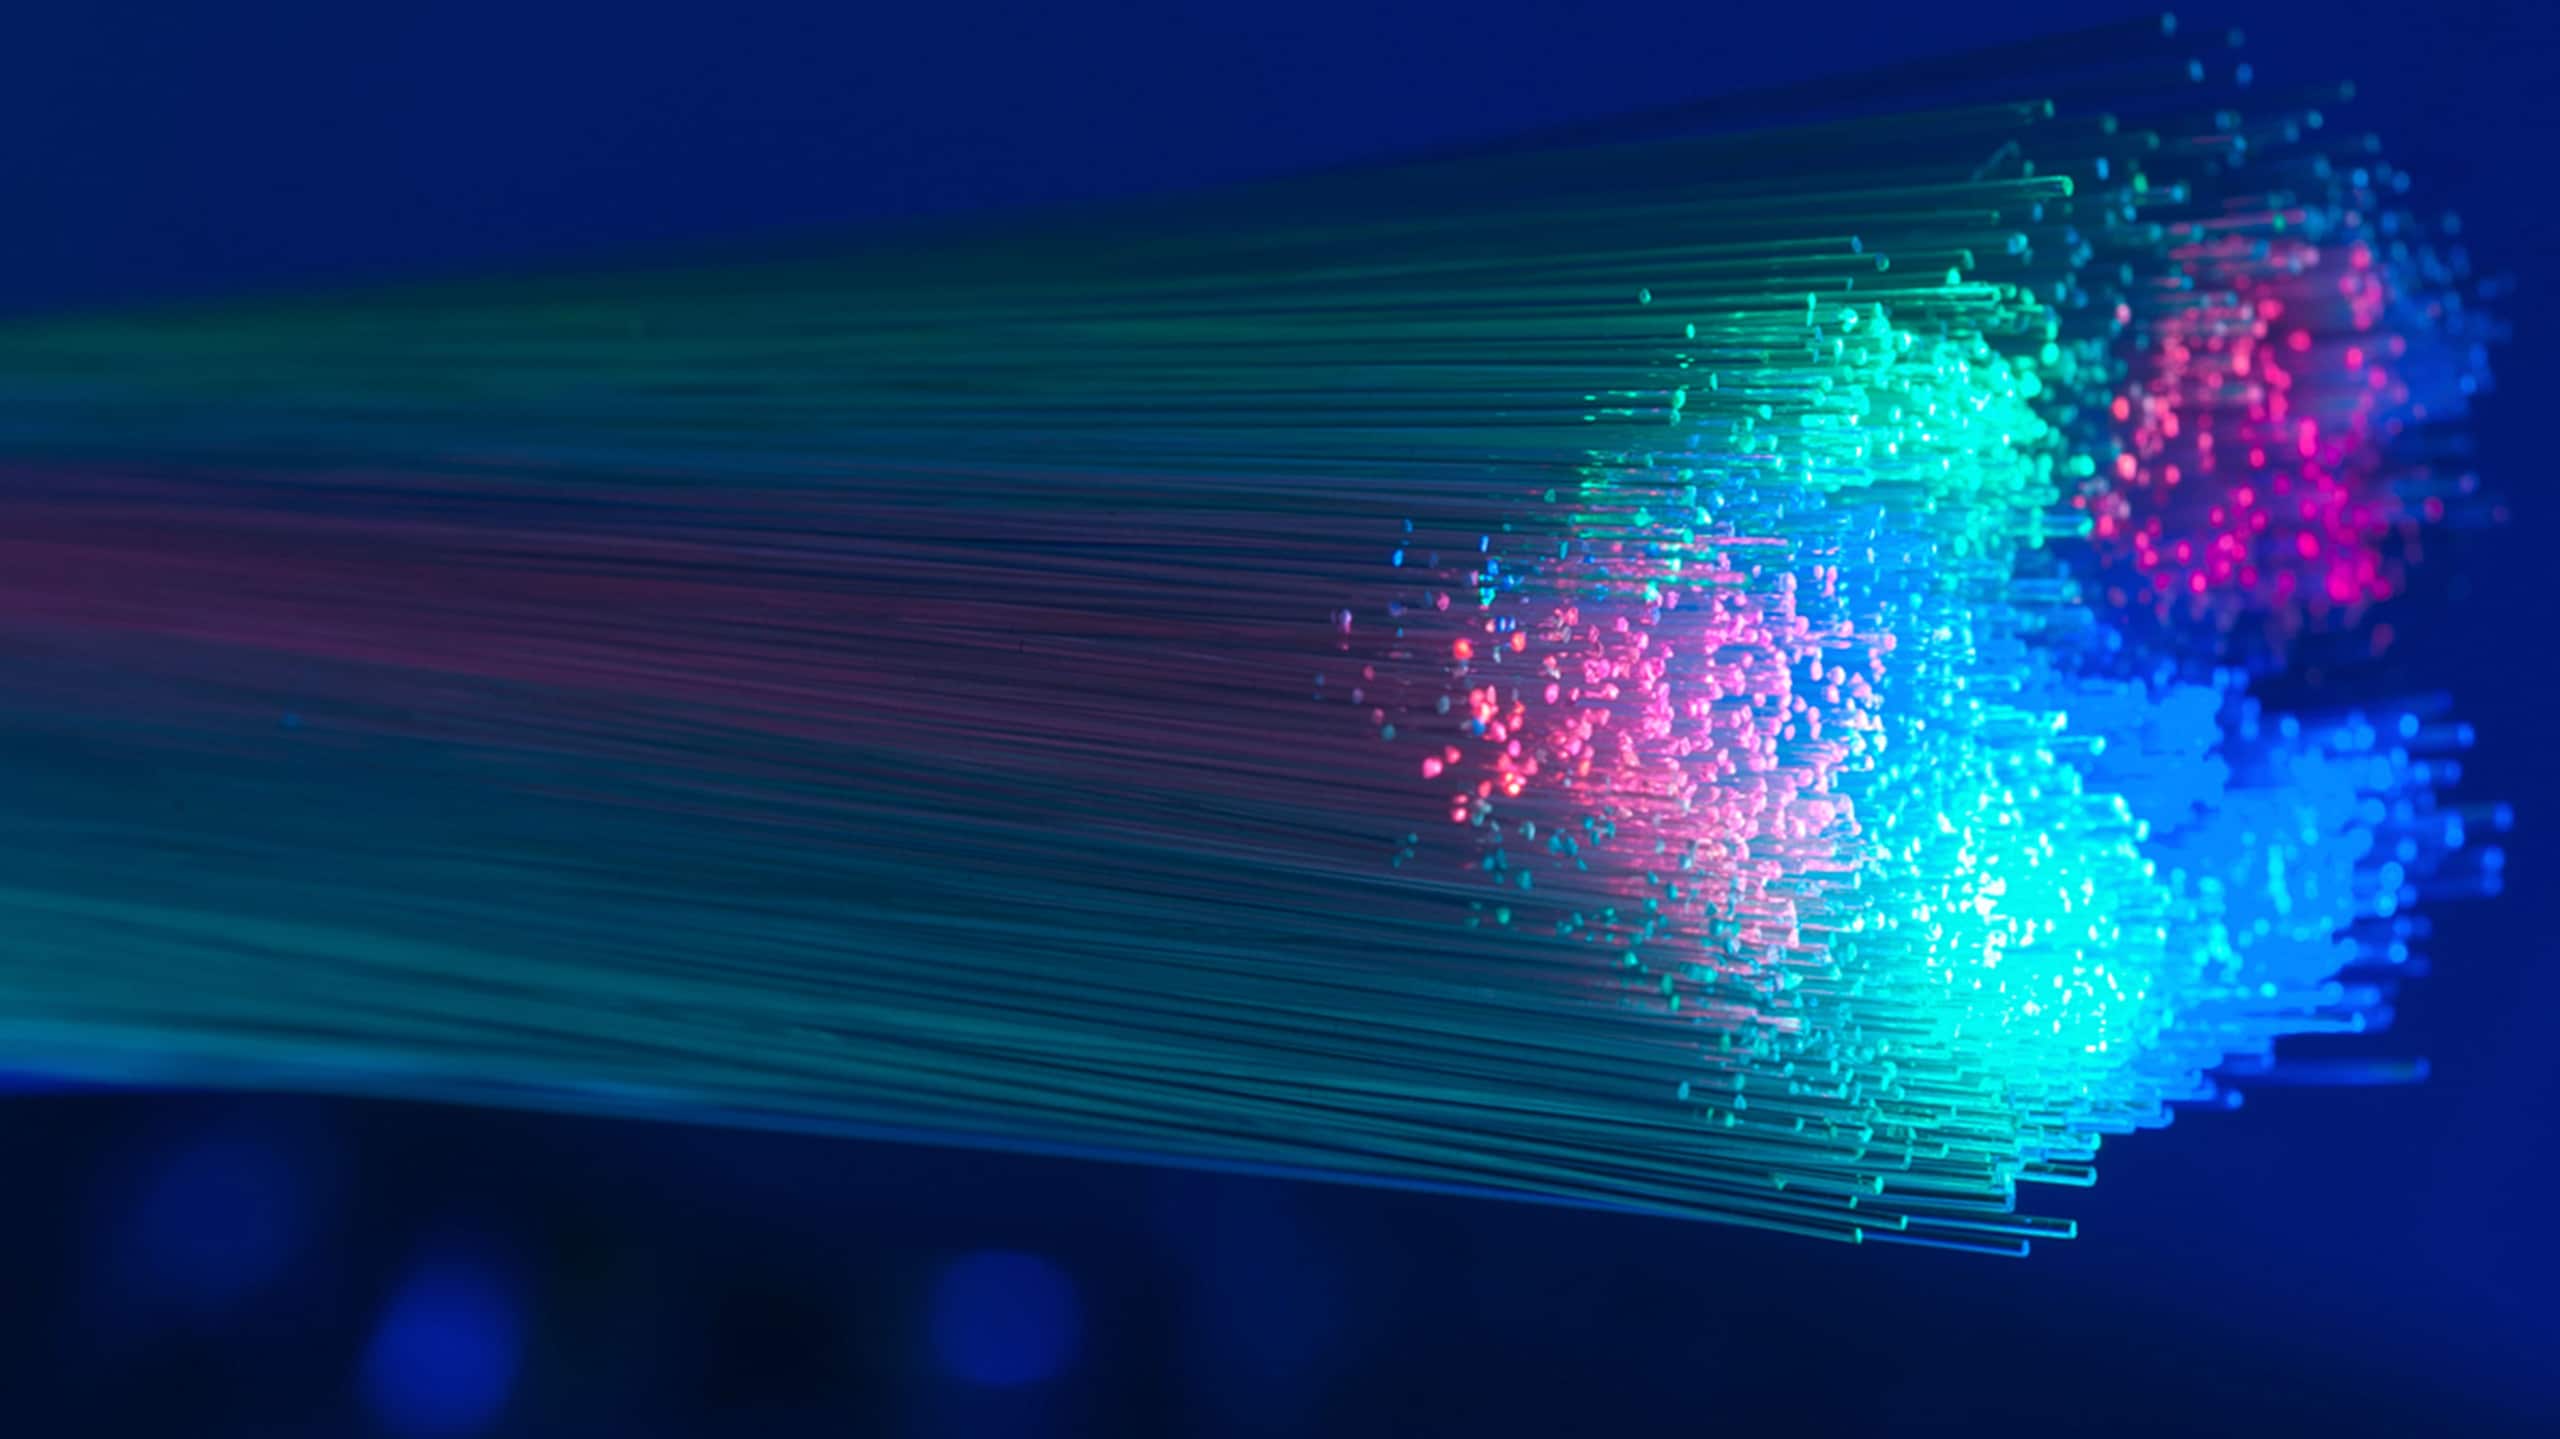 A vibrant close-up view of fiber optic cables illuminated with multicolored lights, displaying a rainbow spectrum that fades into a blurred background, showcasing how to leverage domain and DNS intelligence for OEMs.